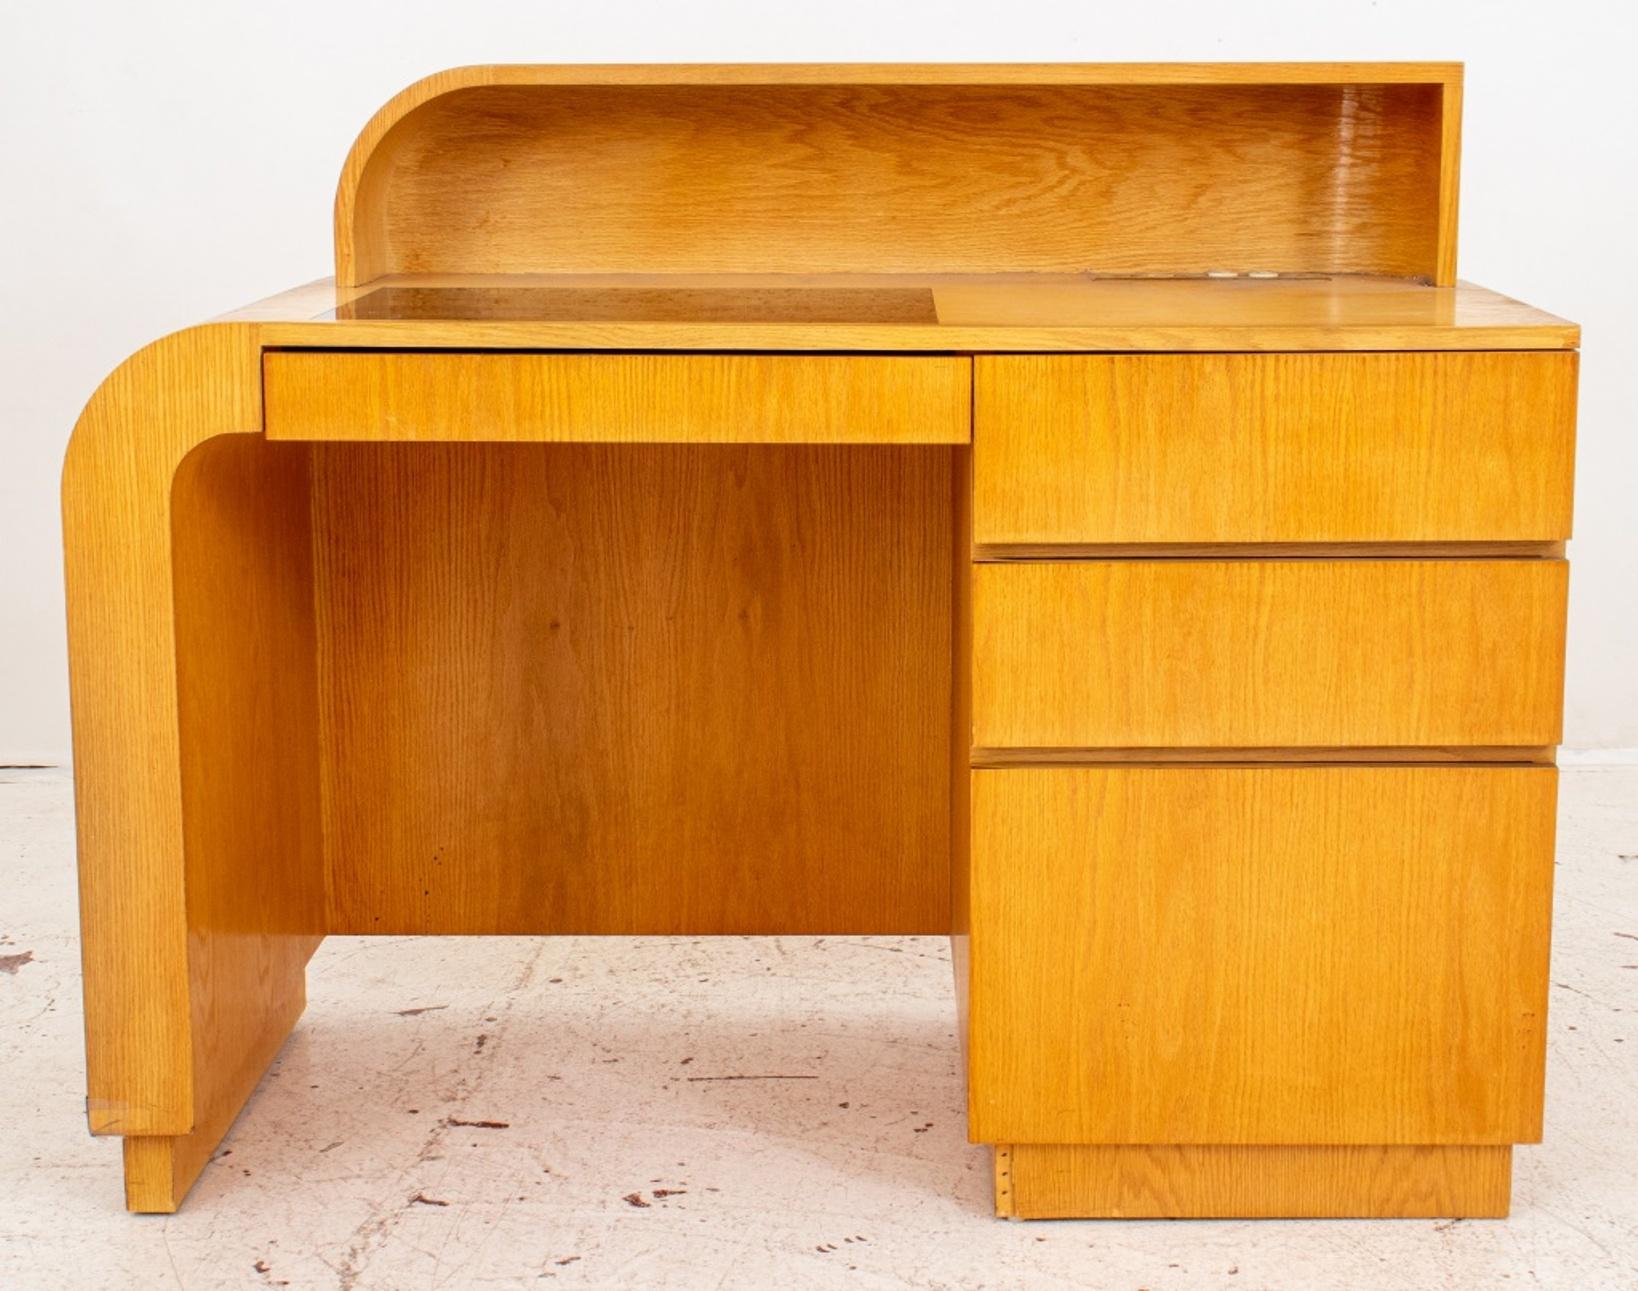 Jay Spectre (American, XX-XXI) for Century Furniture, Art Deco manner oak desk inspired by Donald Deskey, rectangular with left waterfall sides above four short  drawer. 1980s. 

Dimensions: 38